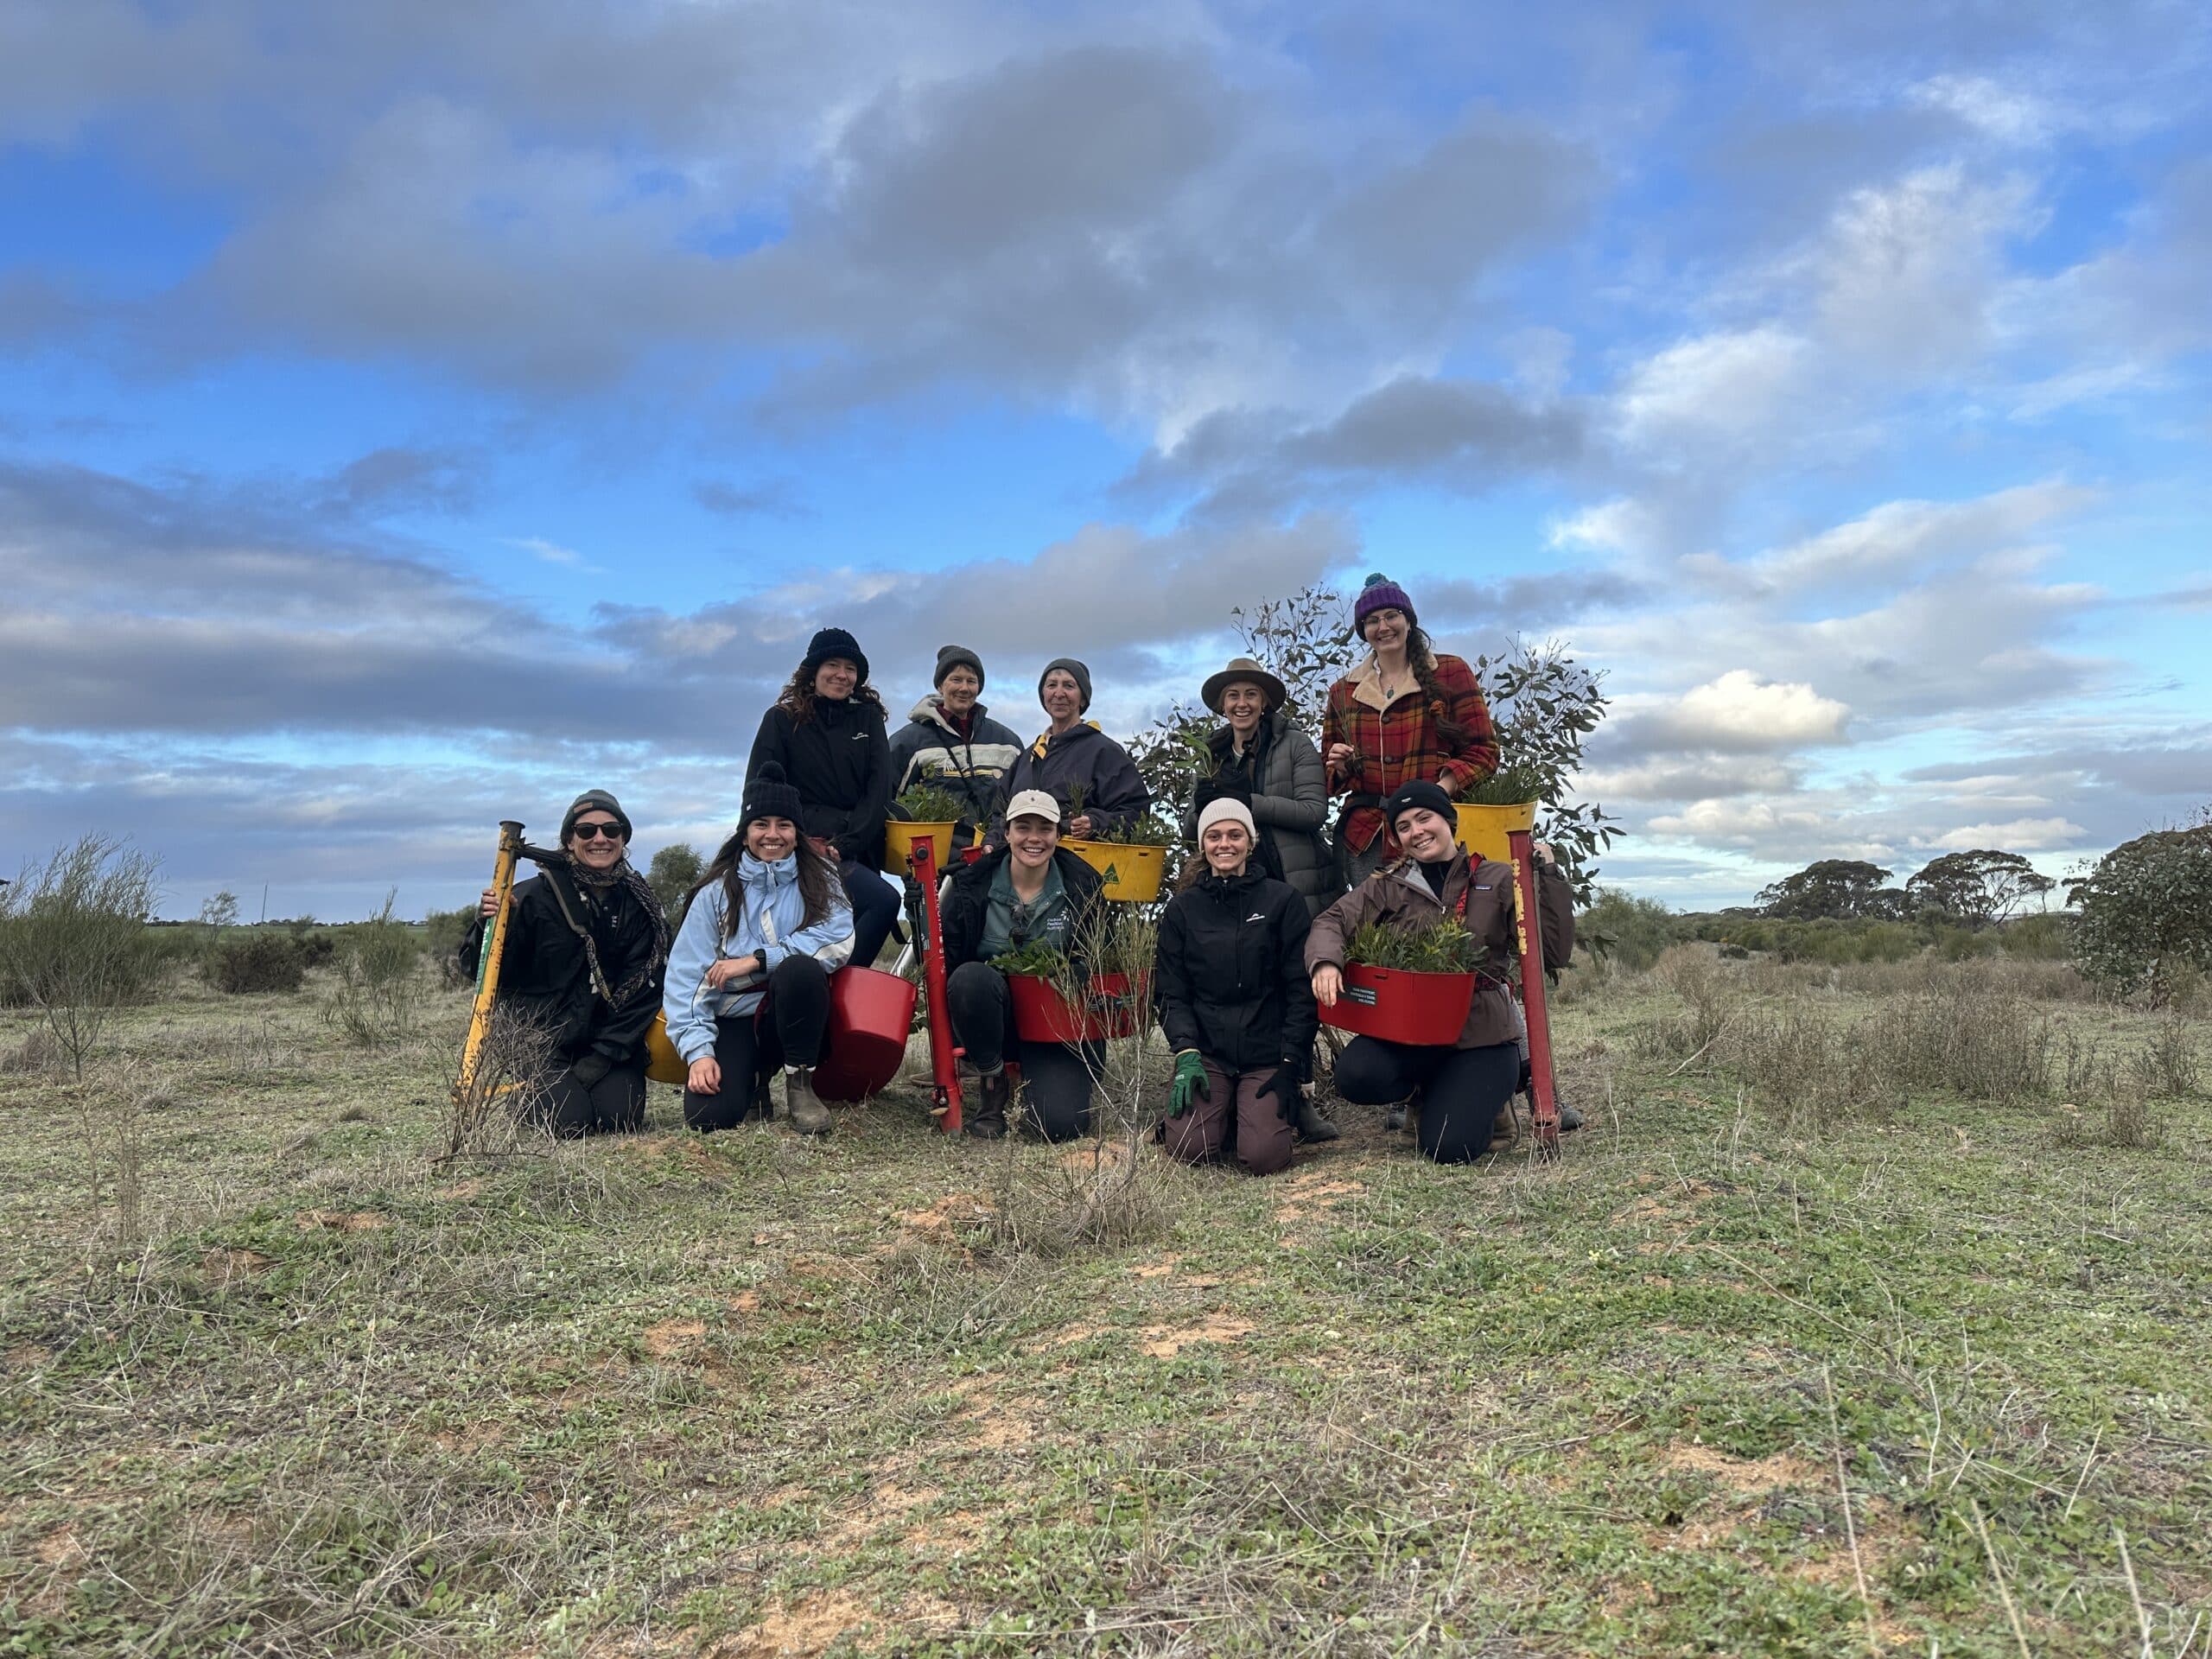 Group photo of ten woman standing and crouching in a field with pottiputki's and seedings buckets